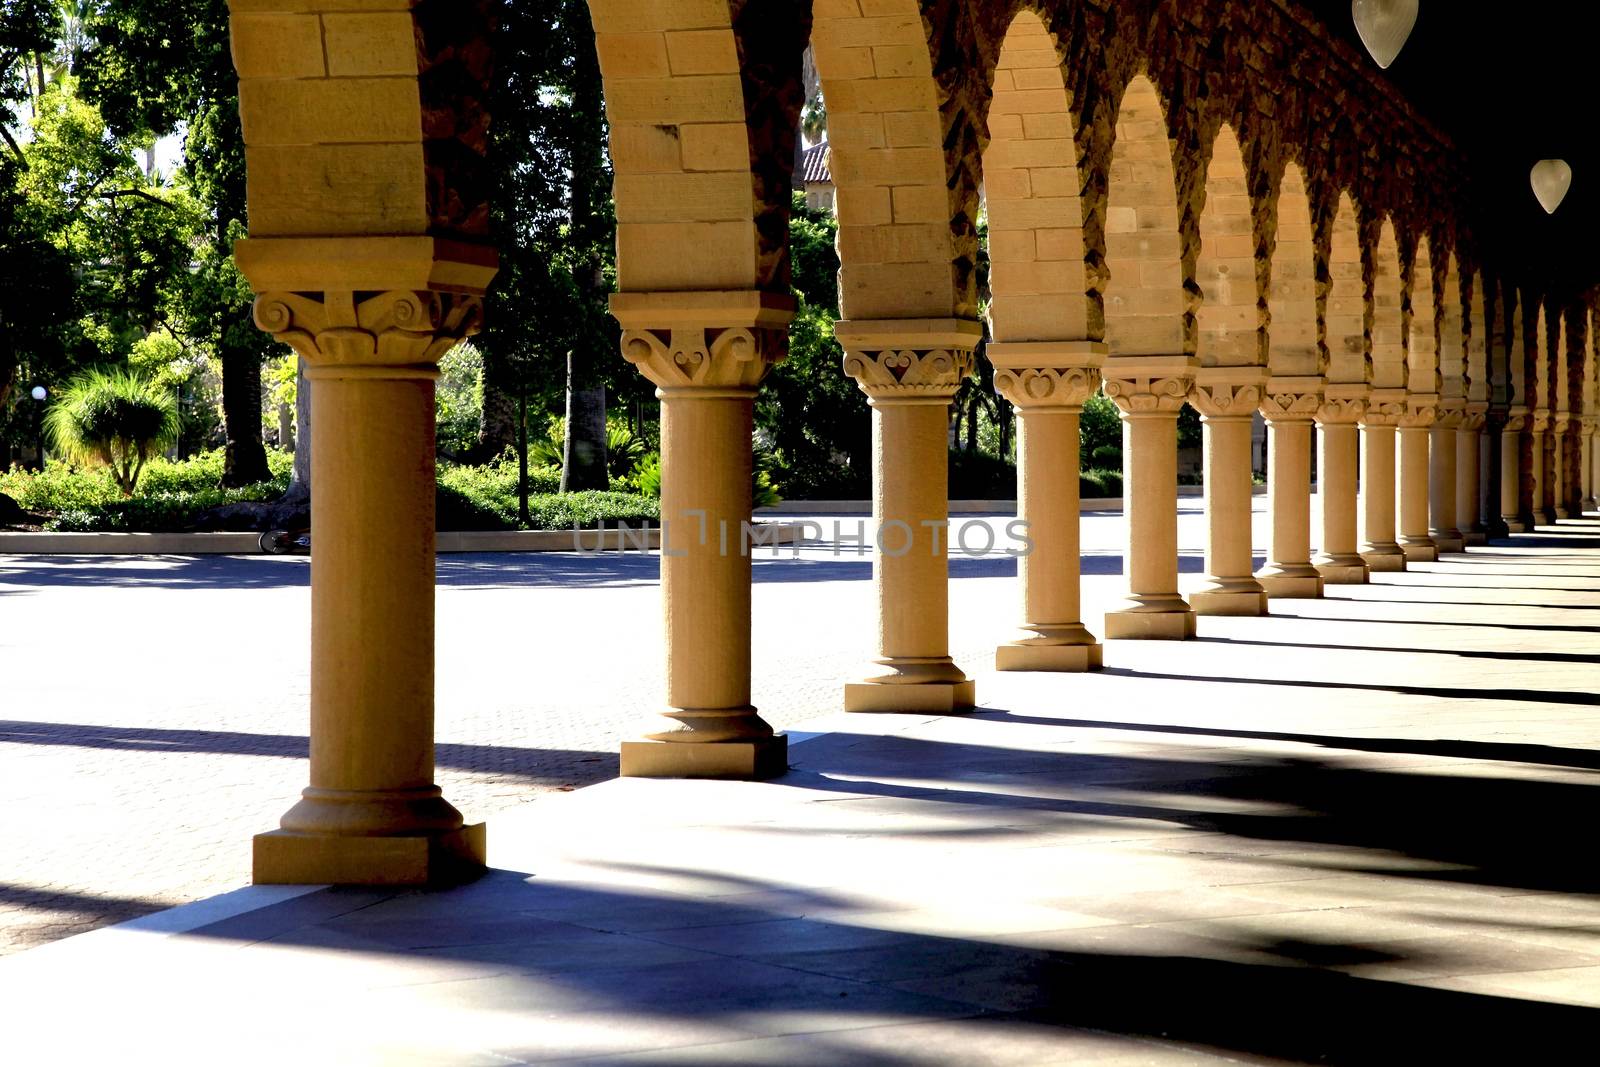 Covered arch way near the main Quad of Stanford University campus located in Palo Alto, California.